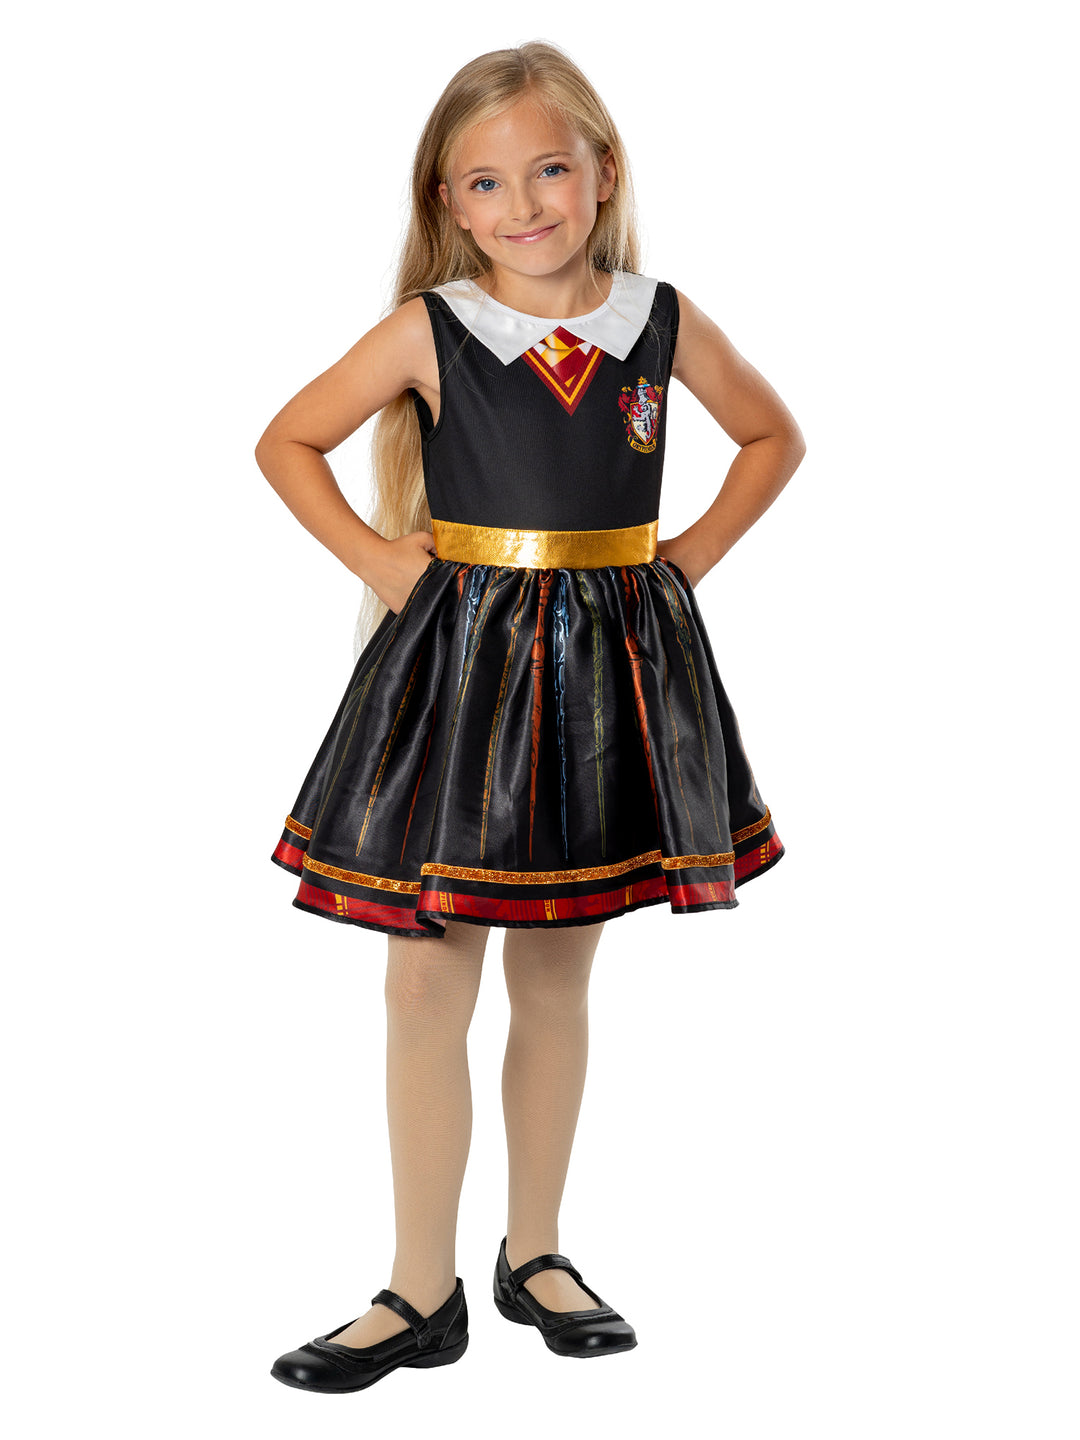 Girls Deluxe Harry Potter Gryffindor Fancy Dress World Book Day Costume